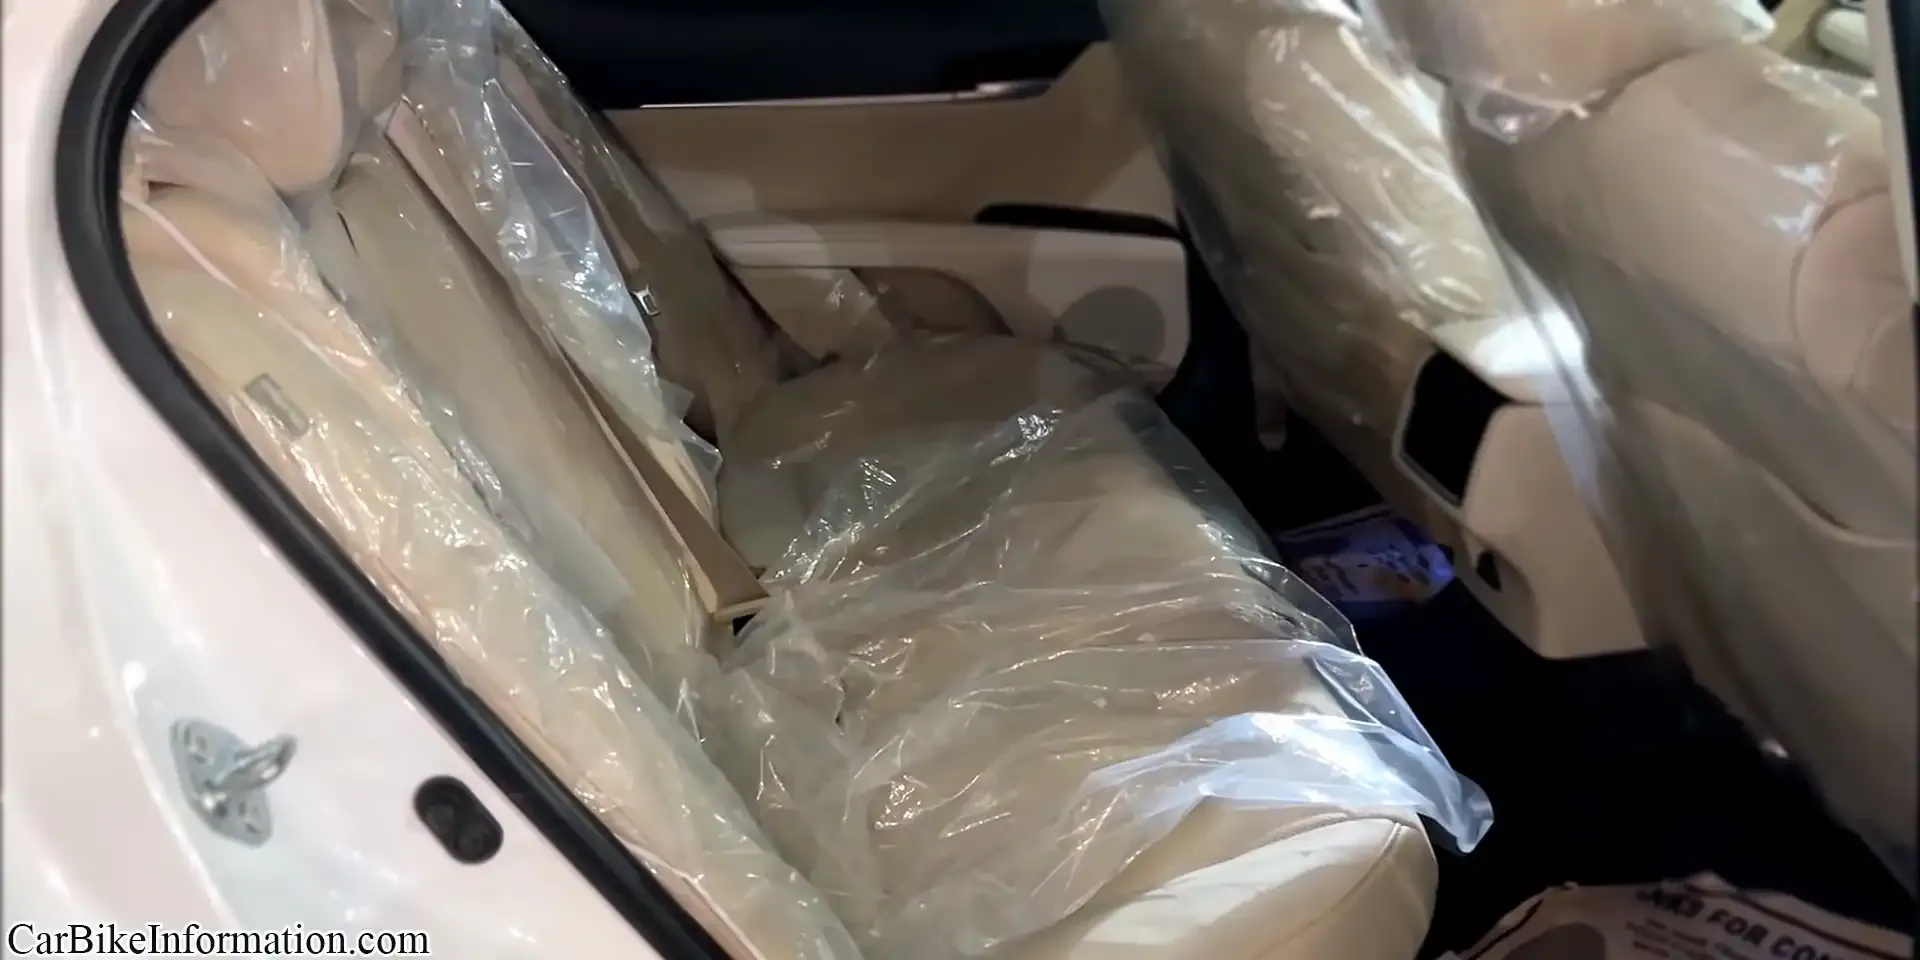 Toyota Camry Back Seat